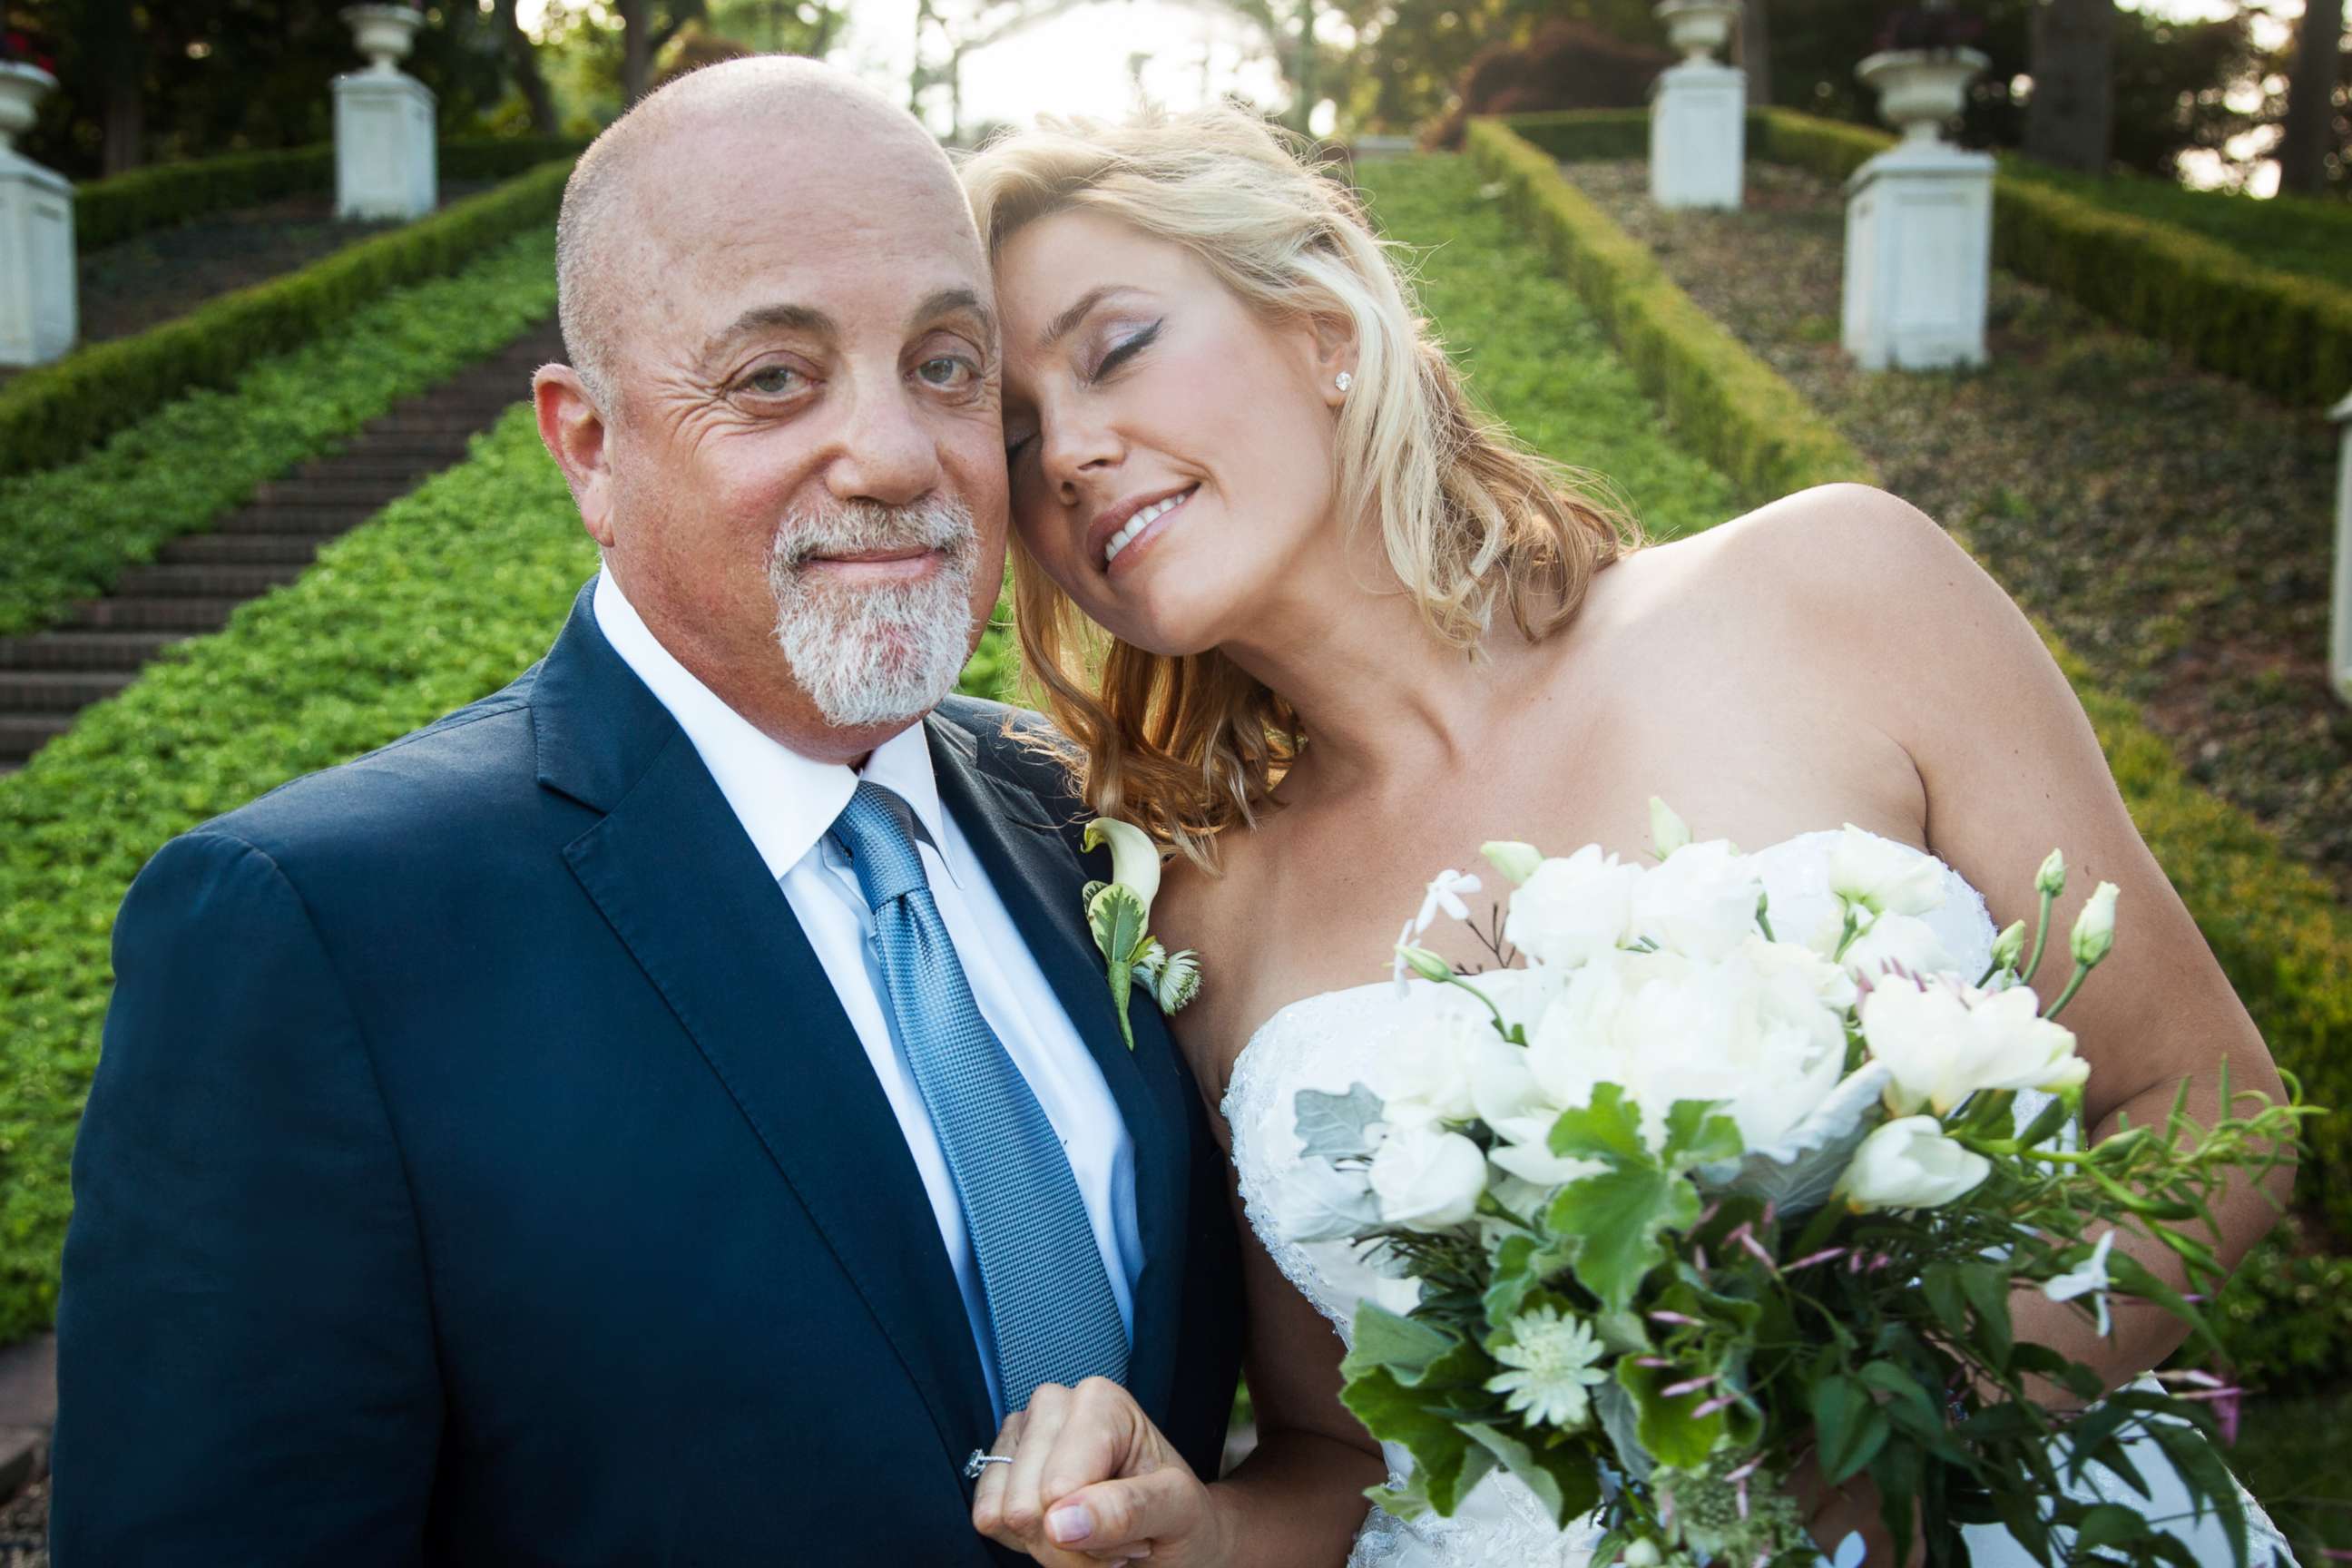 PHOTO: Billy Joel and Alexis Roderick pose for a photo on their wedding day, July 4, 2015 in Long Island, New York.